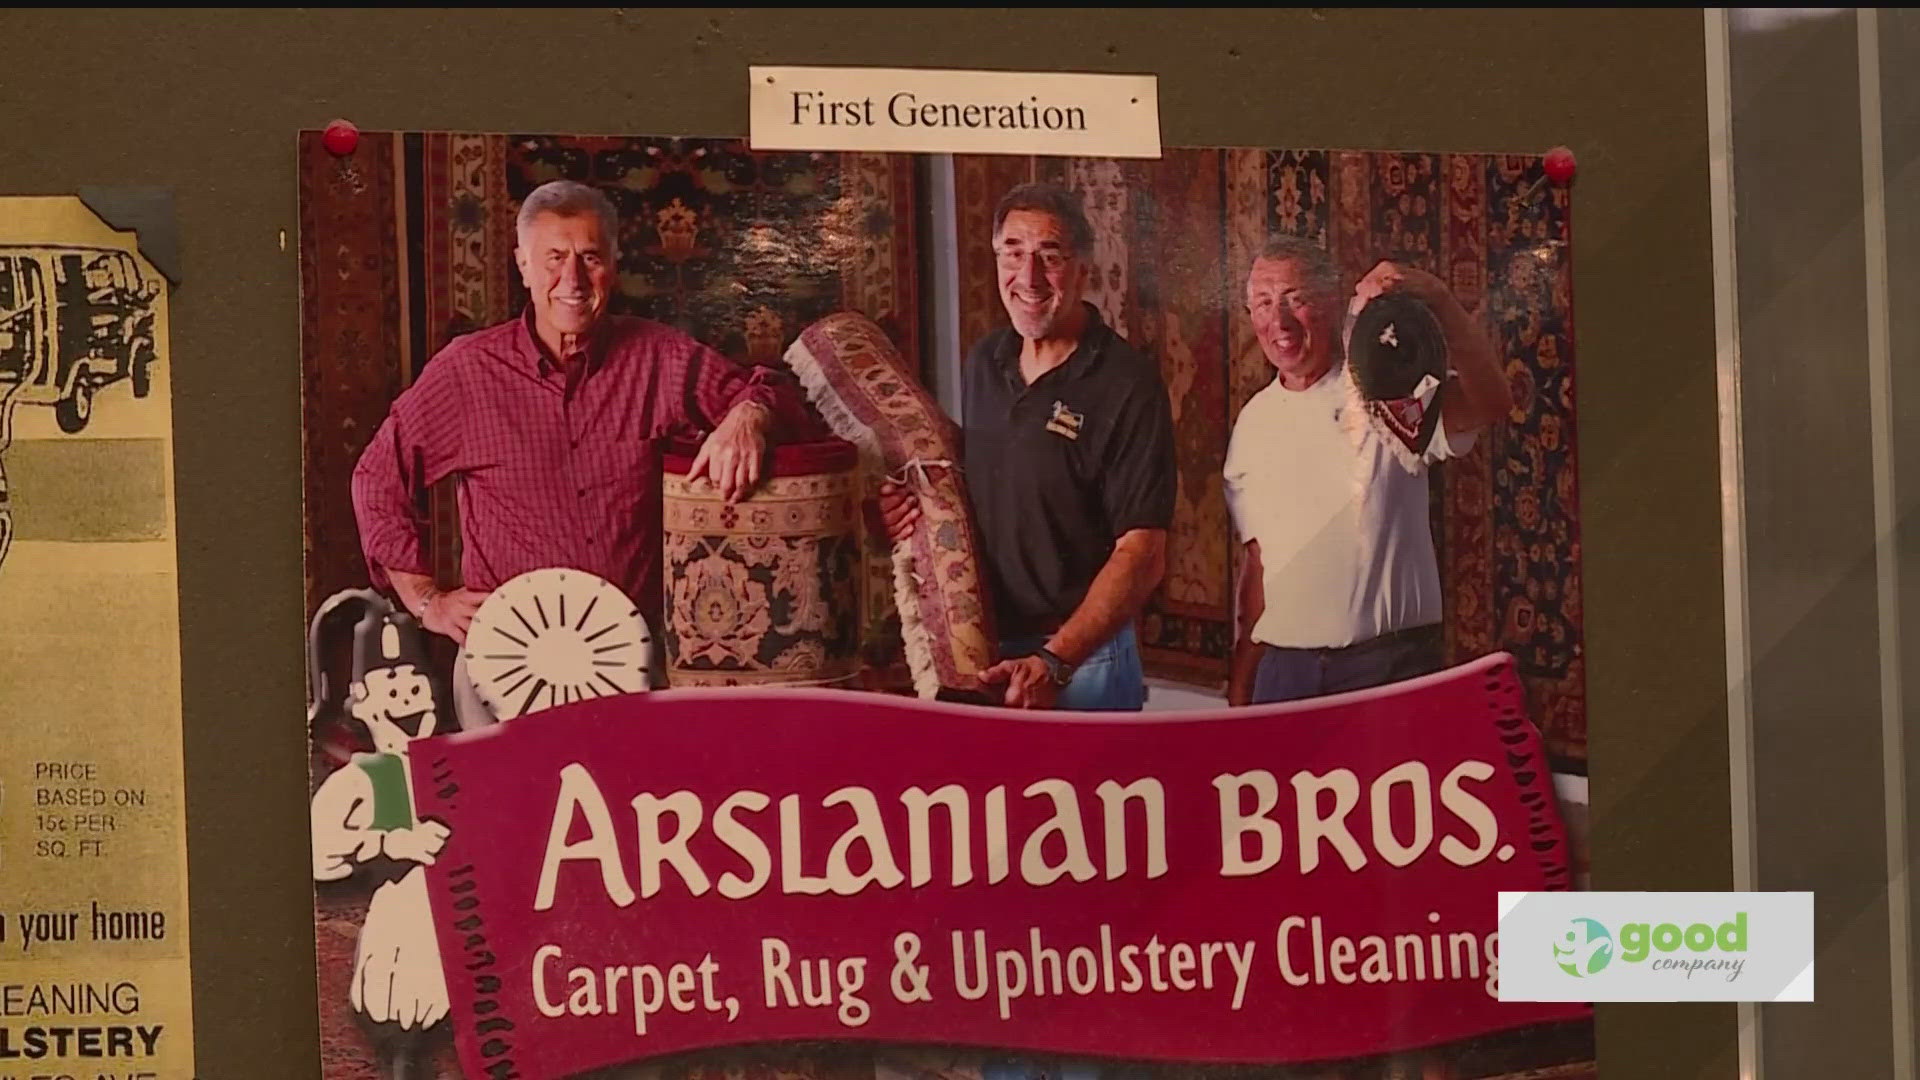 Joe talks with Ted and Don Arslanian about a company that's been helping keep the community clean for over 60 years now! Sponsored by: Arslanian Bros.